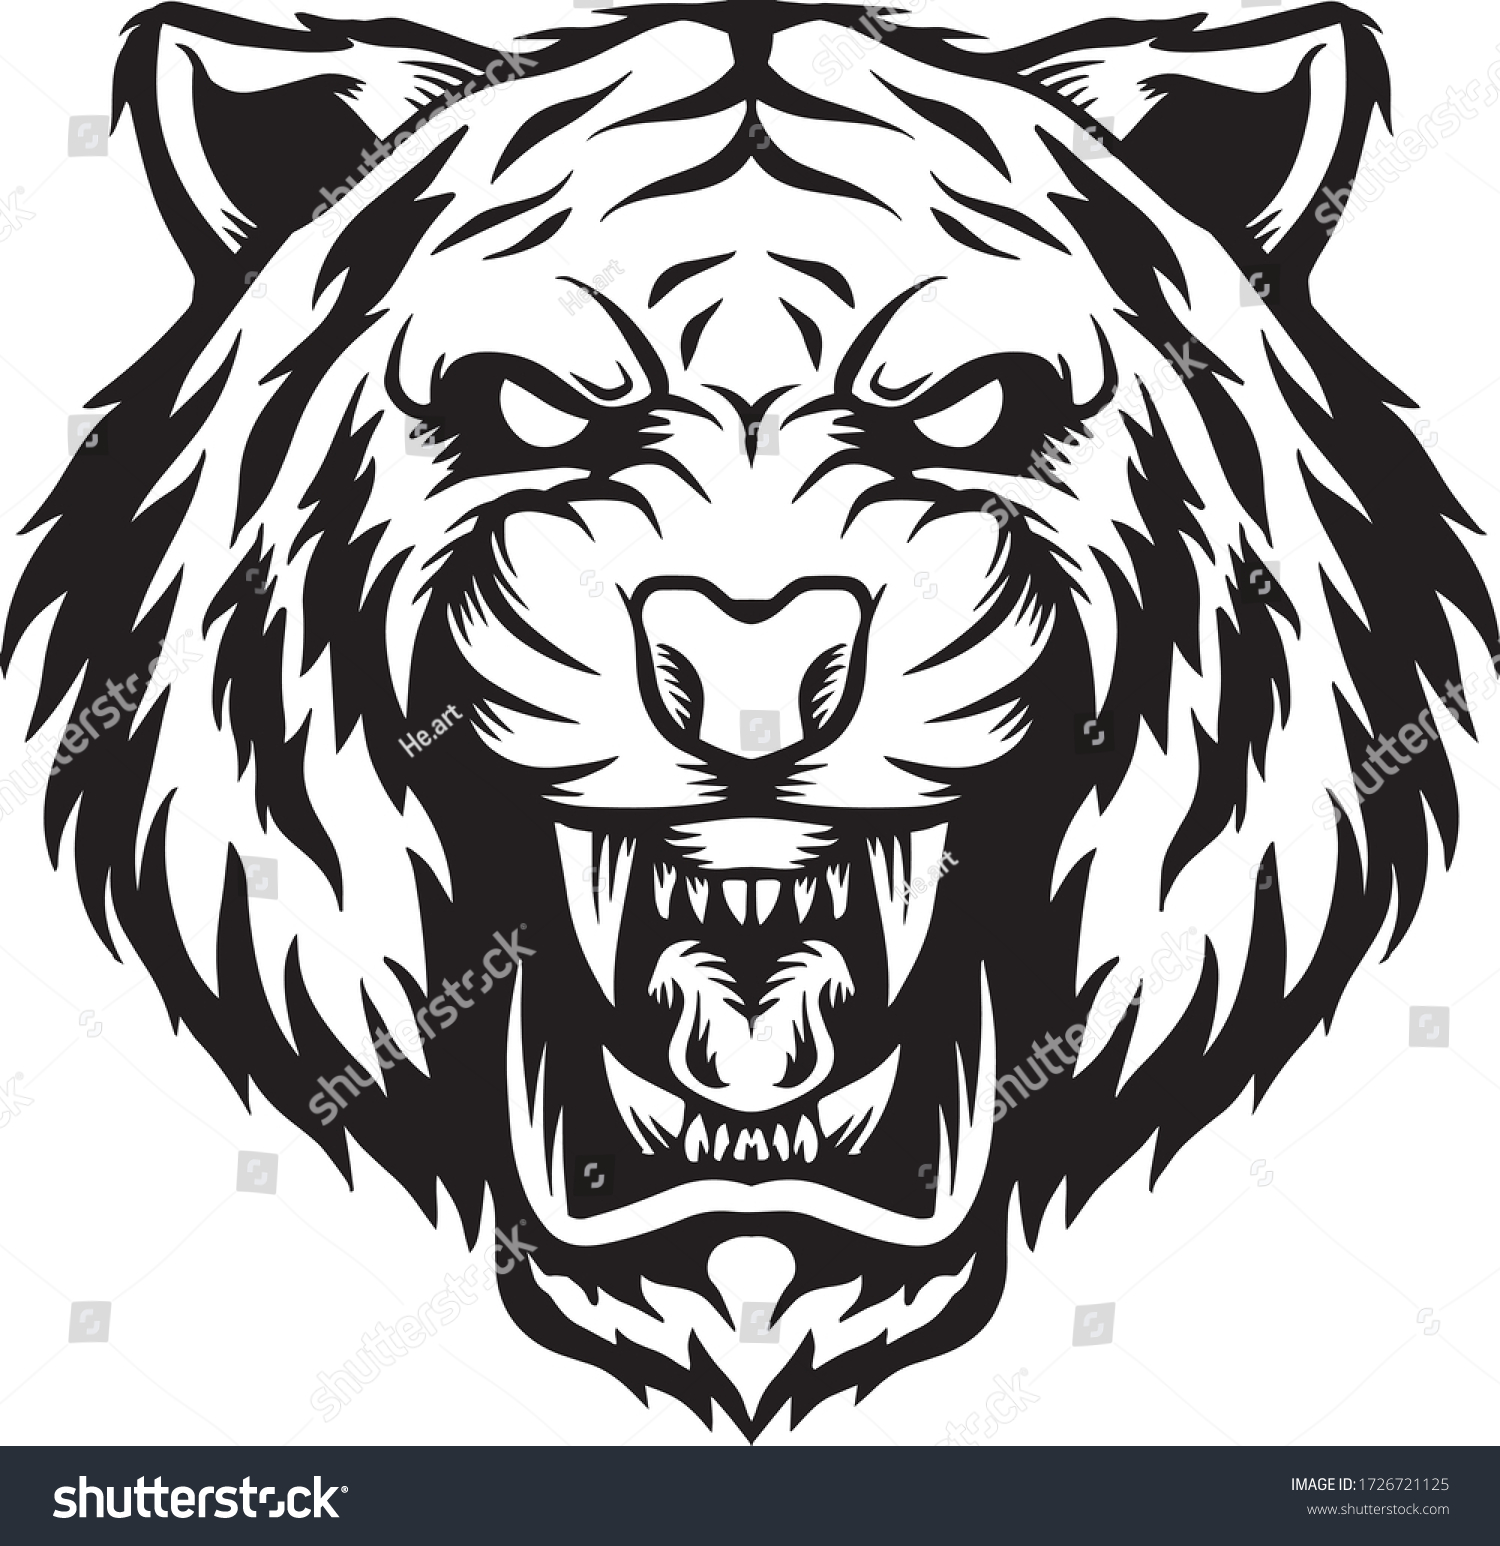 Black White Illustration Angry Tiger Stock Vector Royalty Free 1726721125 